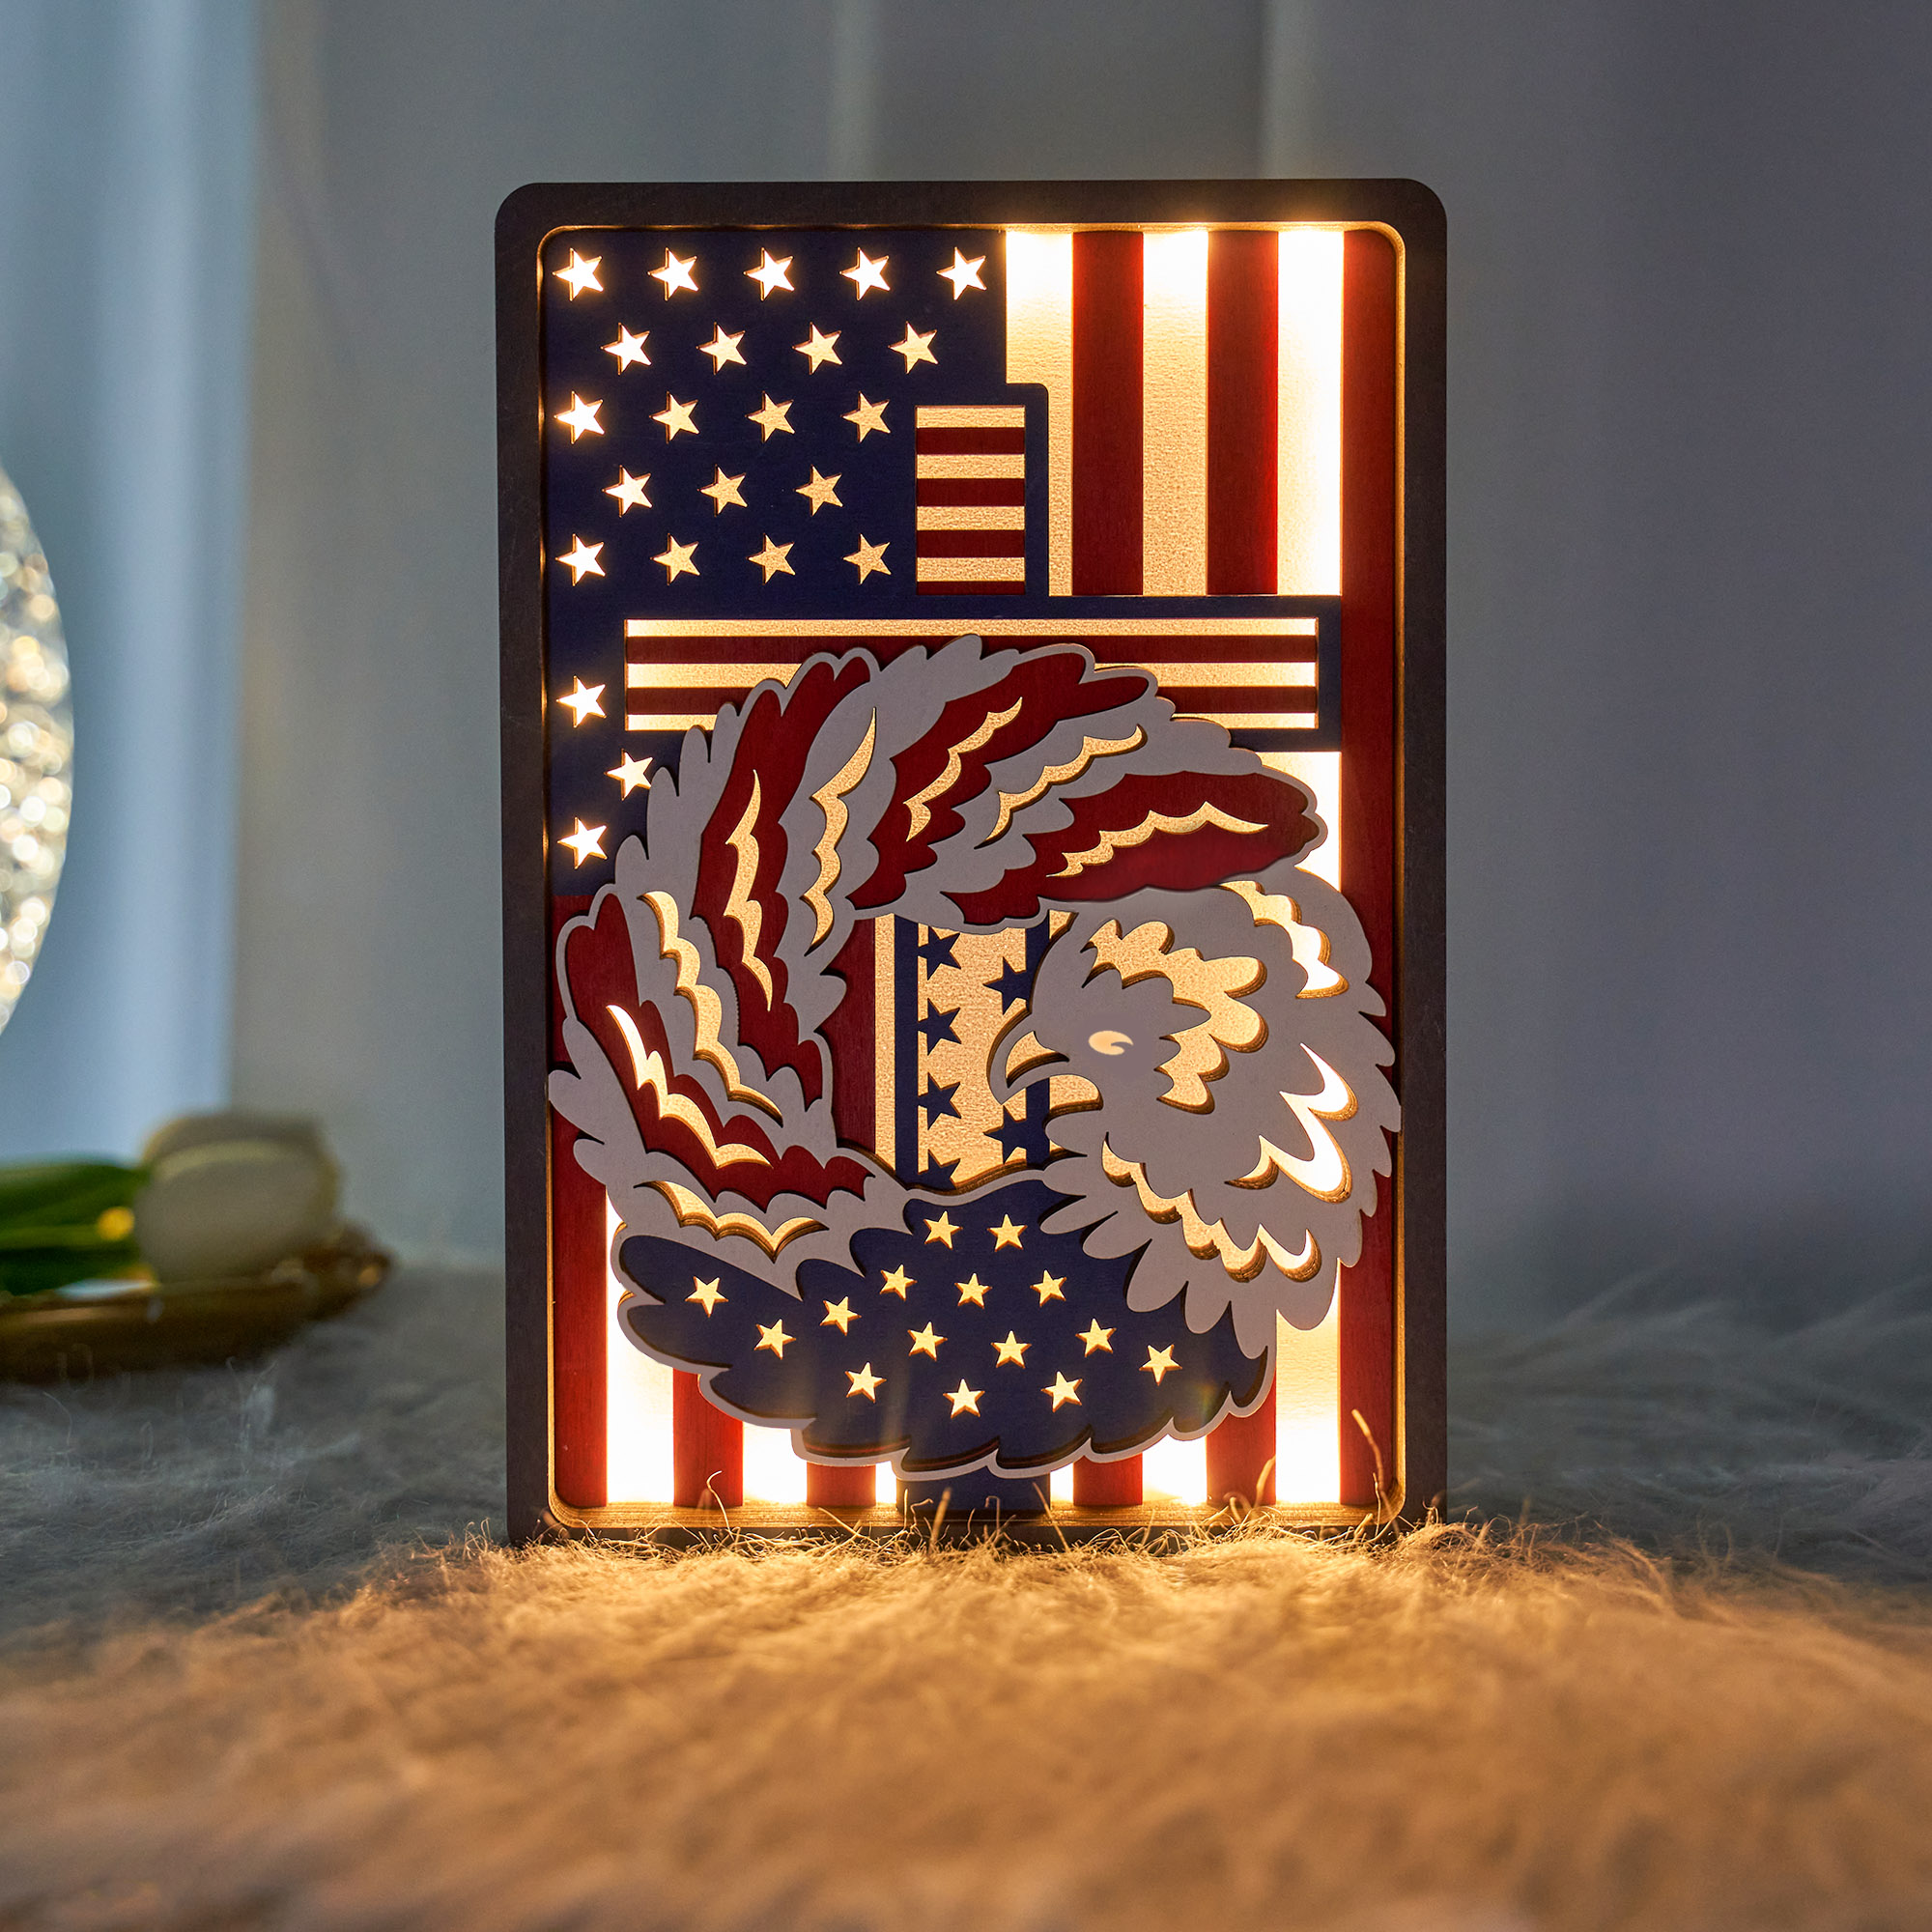 Eagle Wreath of Independence Day LED Wooden Night Light Gift for Festival Home Desktop Decor